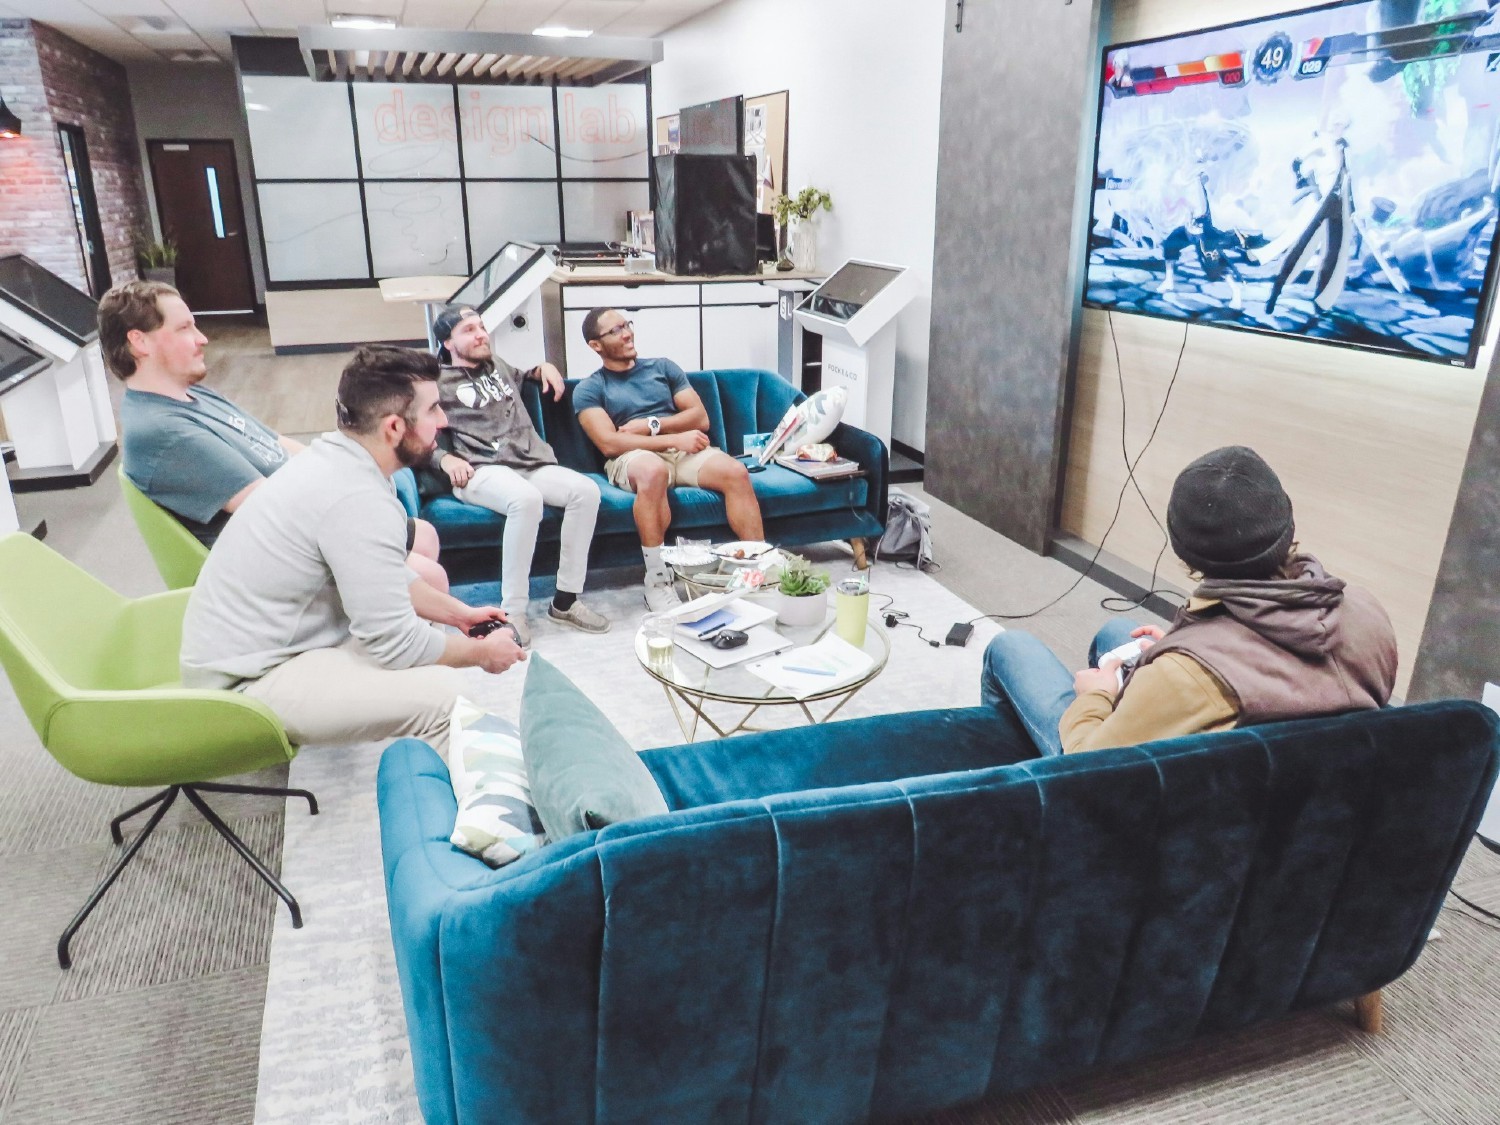 Our service team playing video games in our designed Living Room.